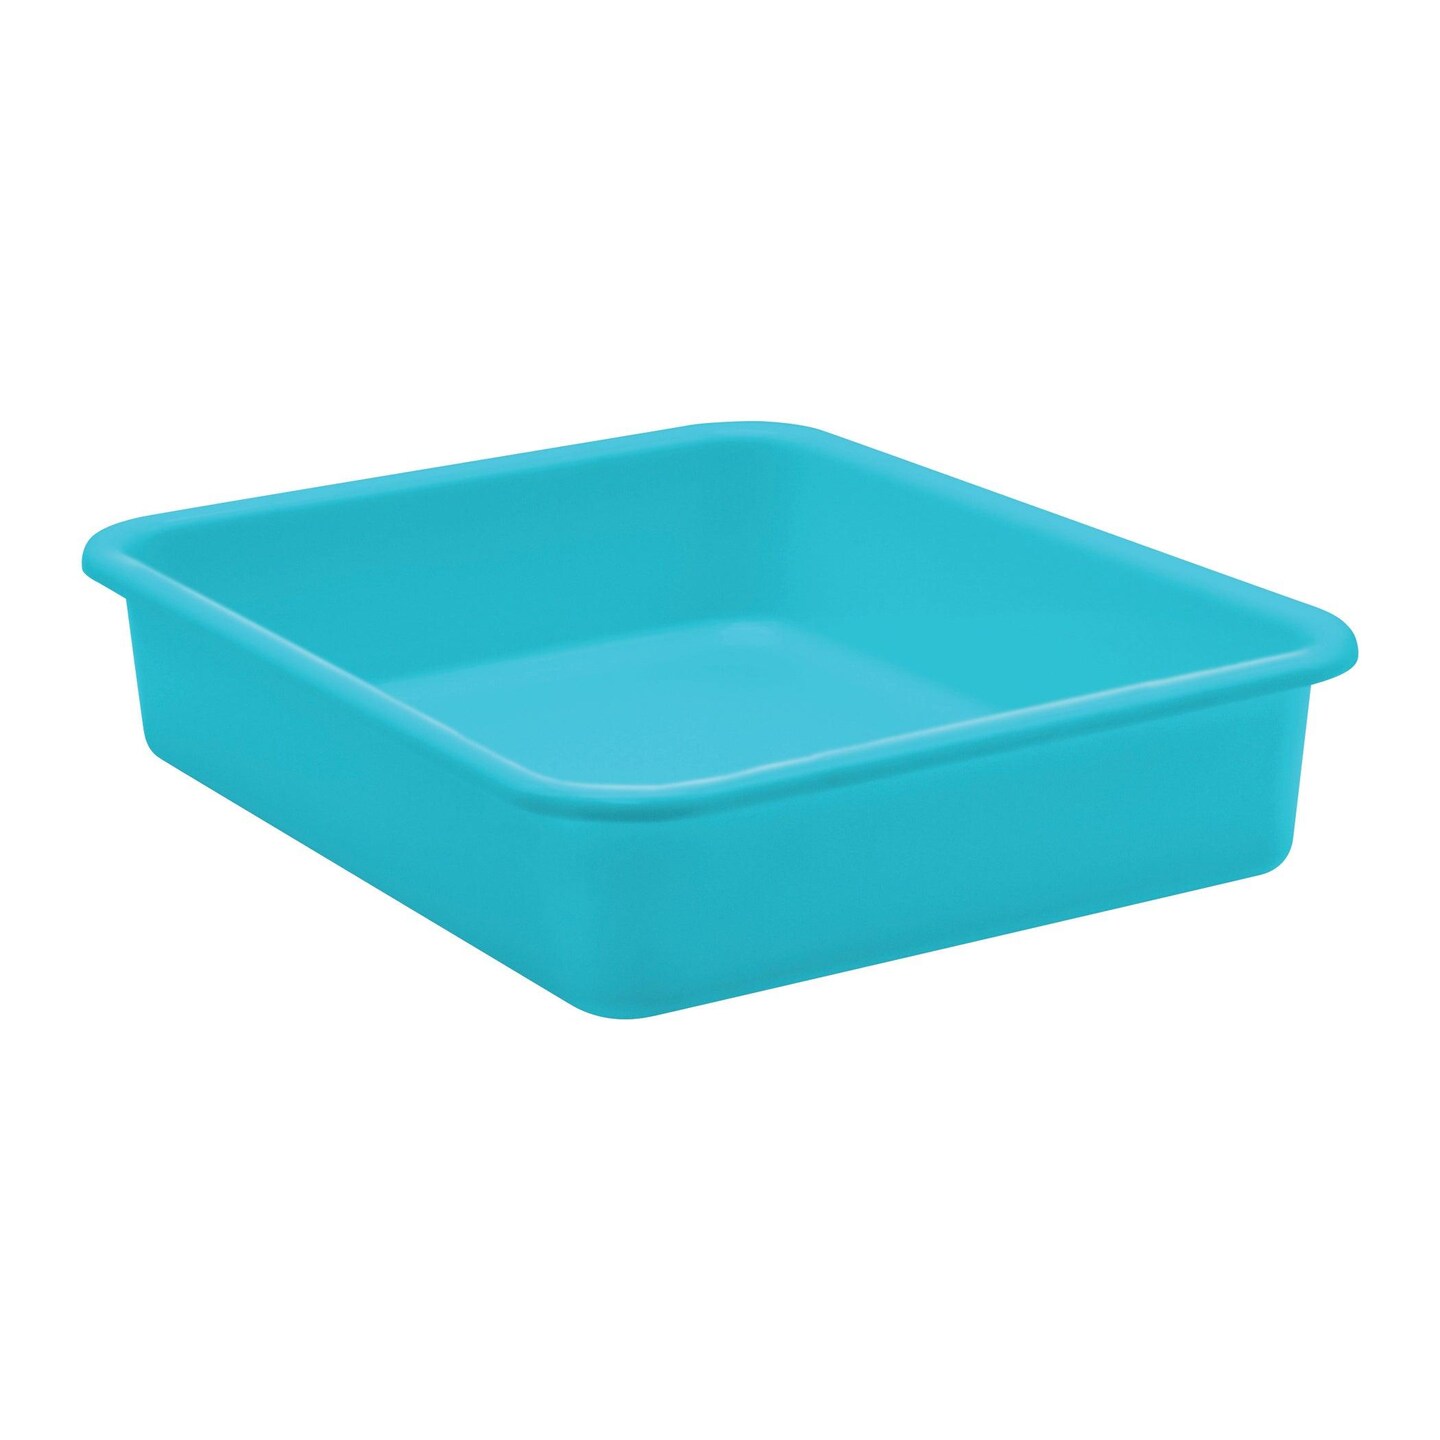 Teal Large Plastic Letter Tray, Pack of 6